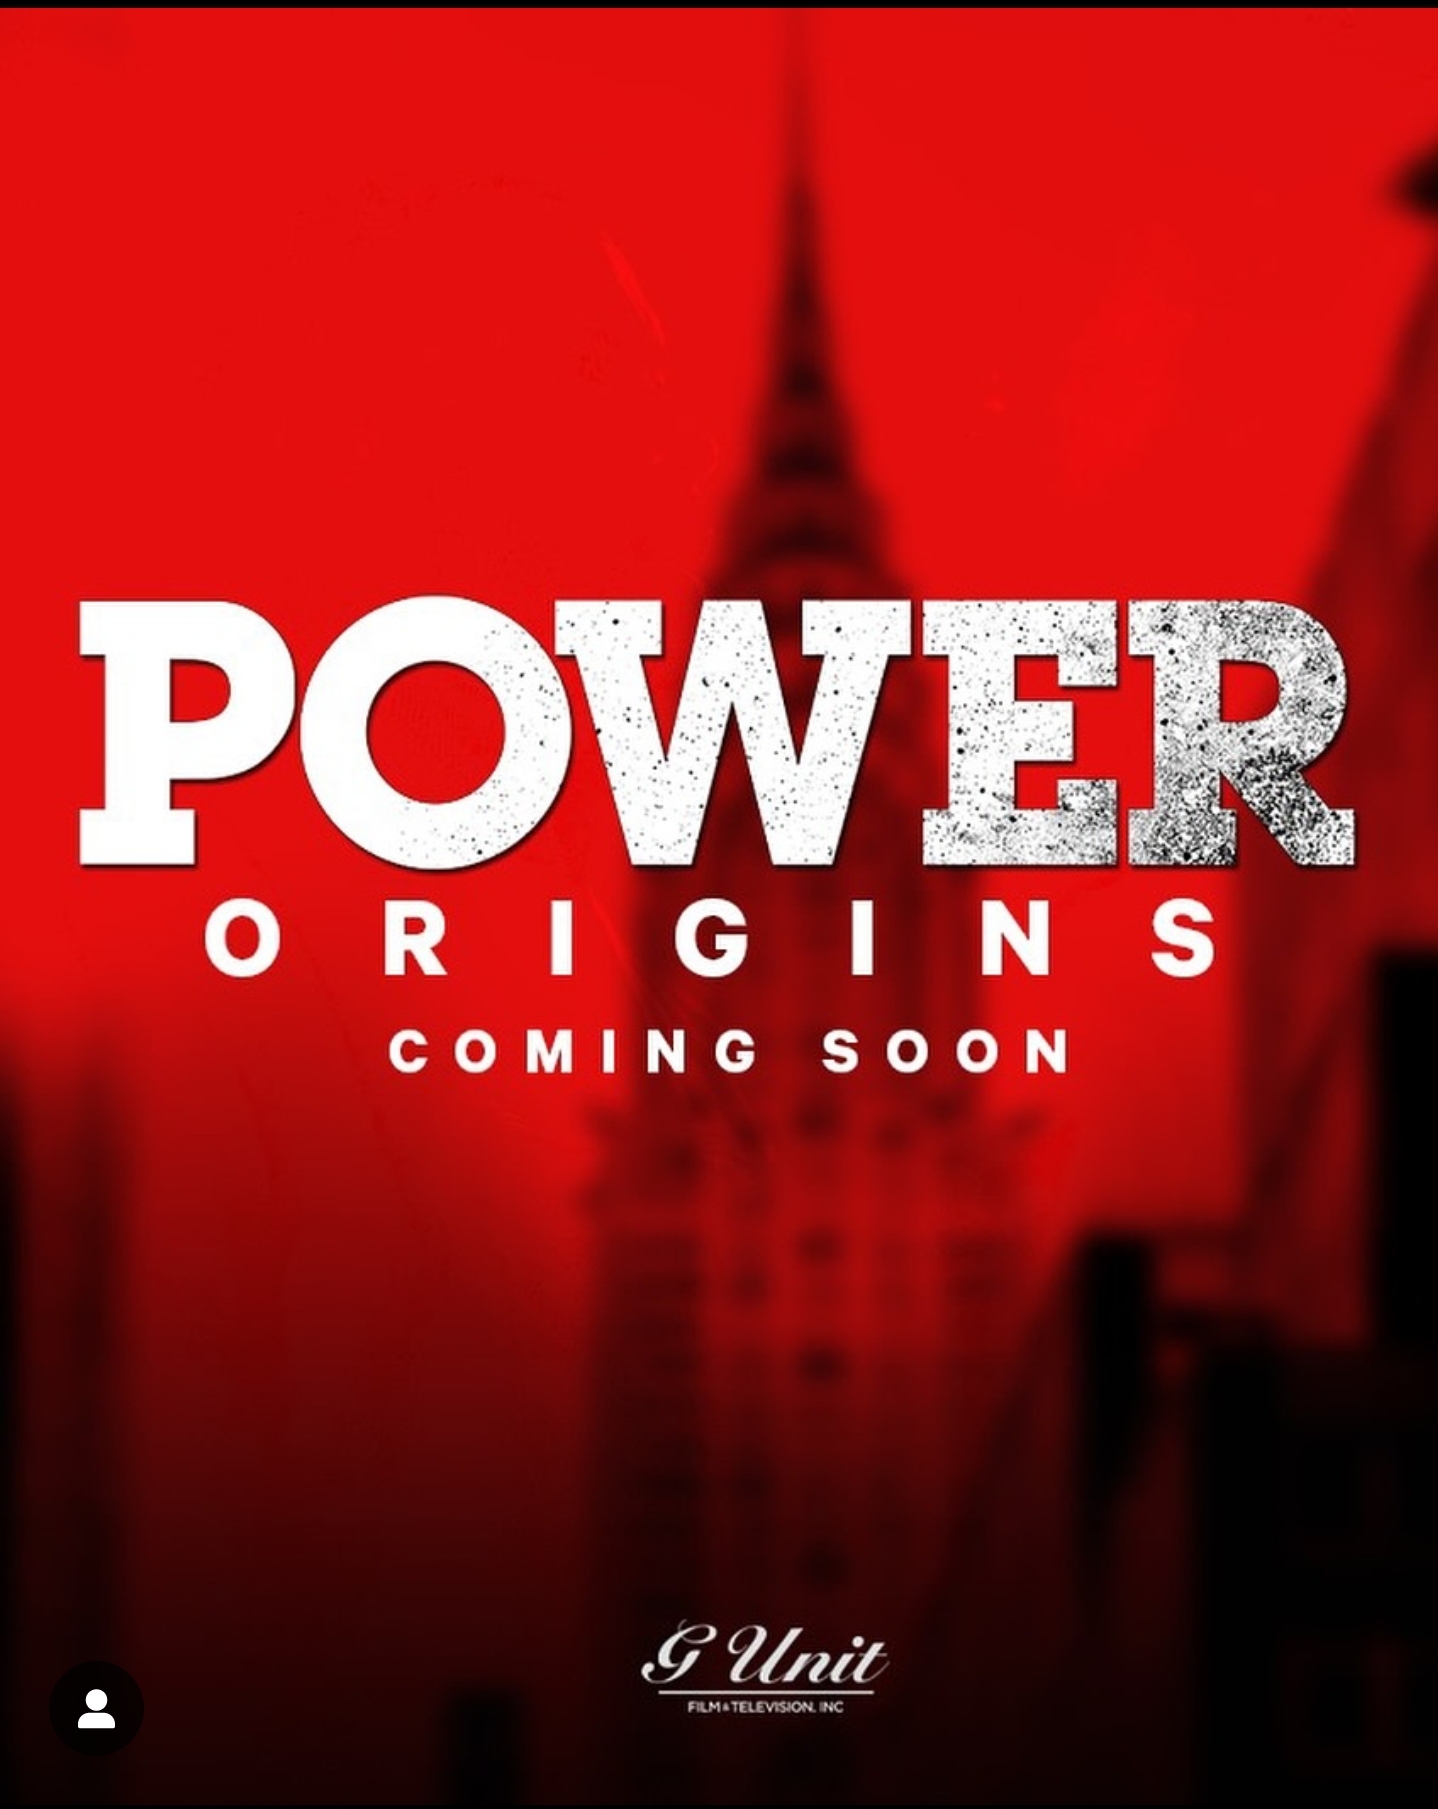 Starz Announces Power Universe Prequel Series “Origins” in Development About the Origin Story of “Power” Fan Favorite Characters Ghost and Tommy